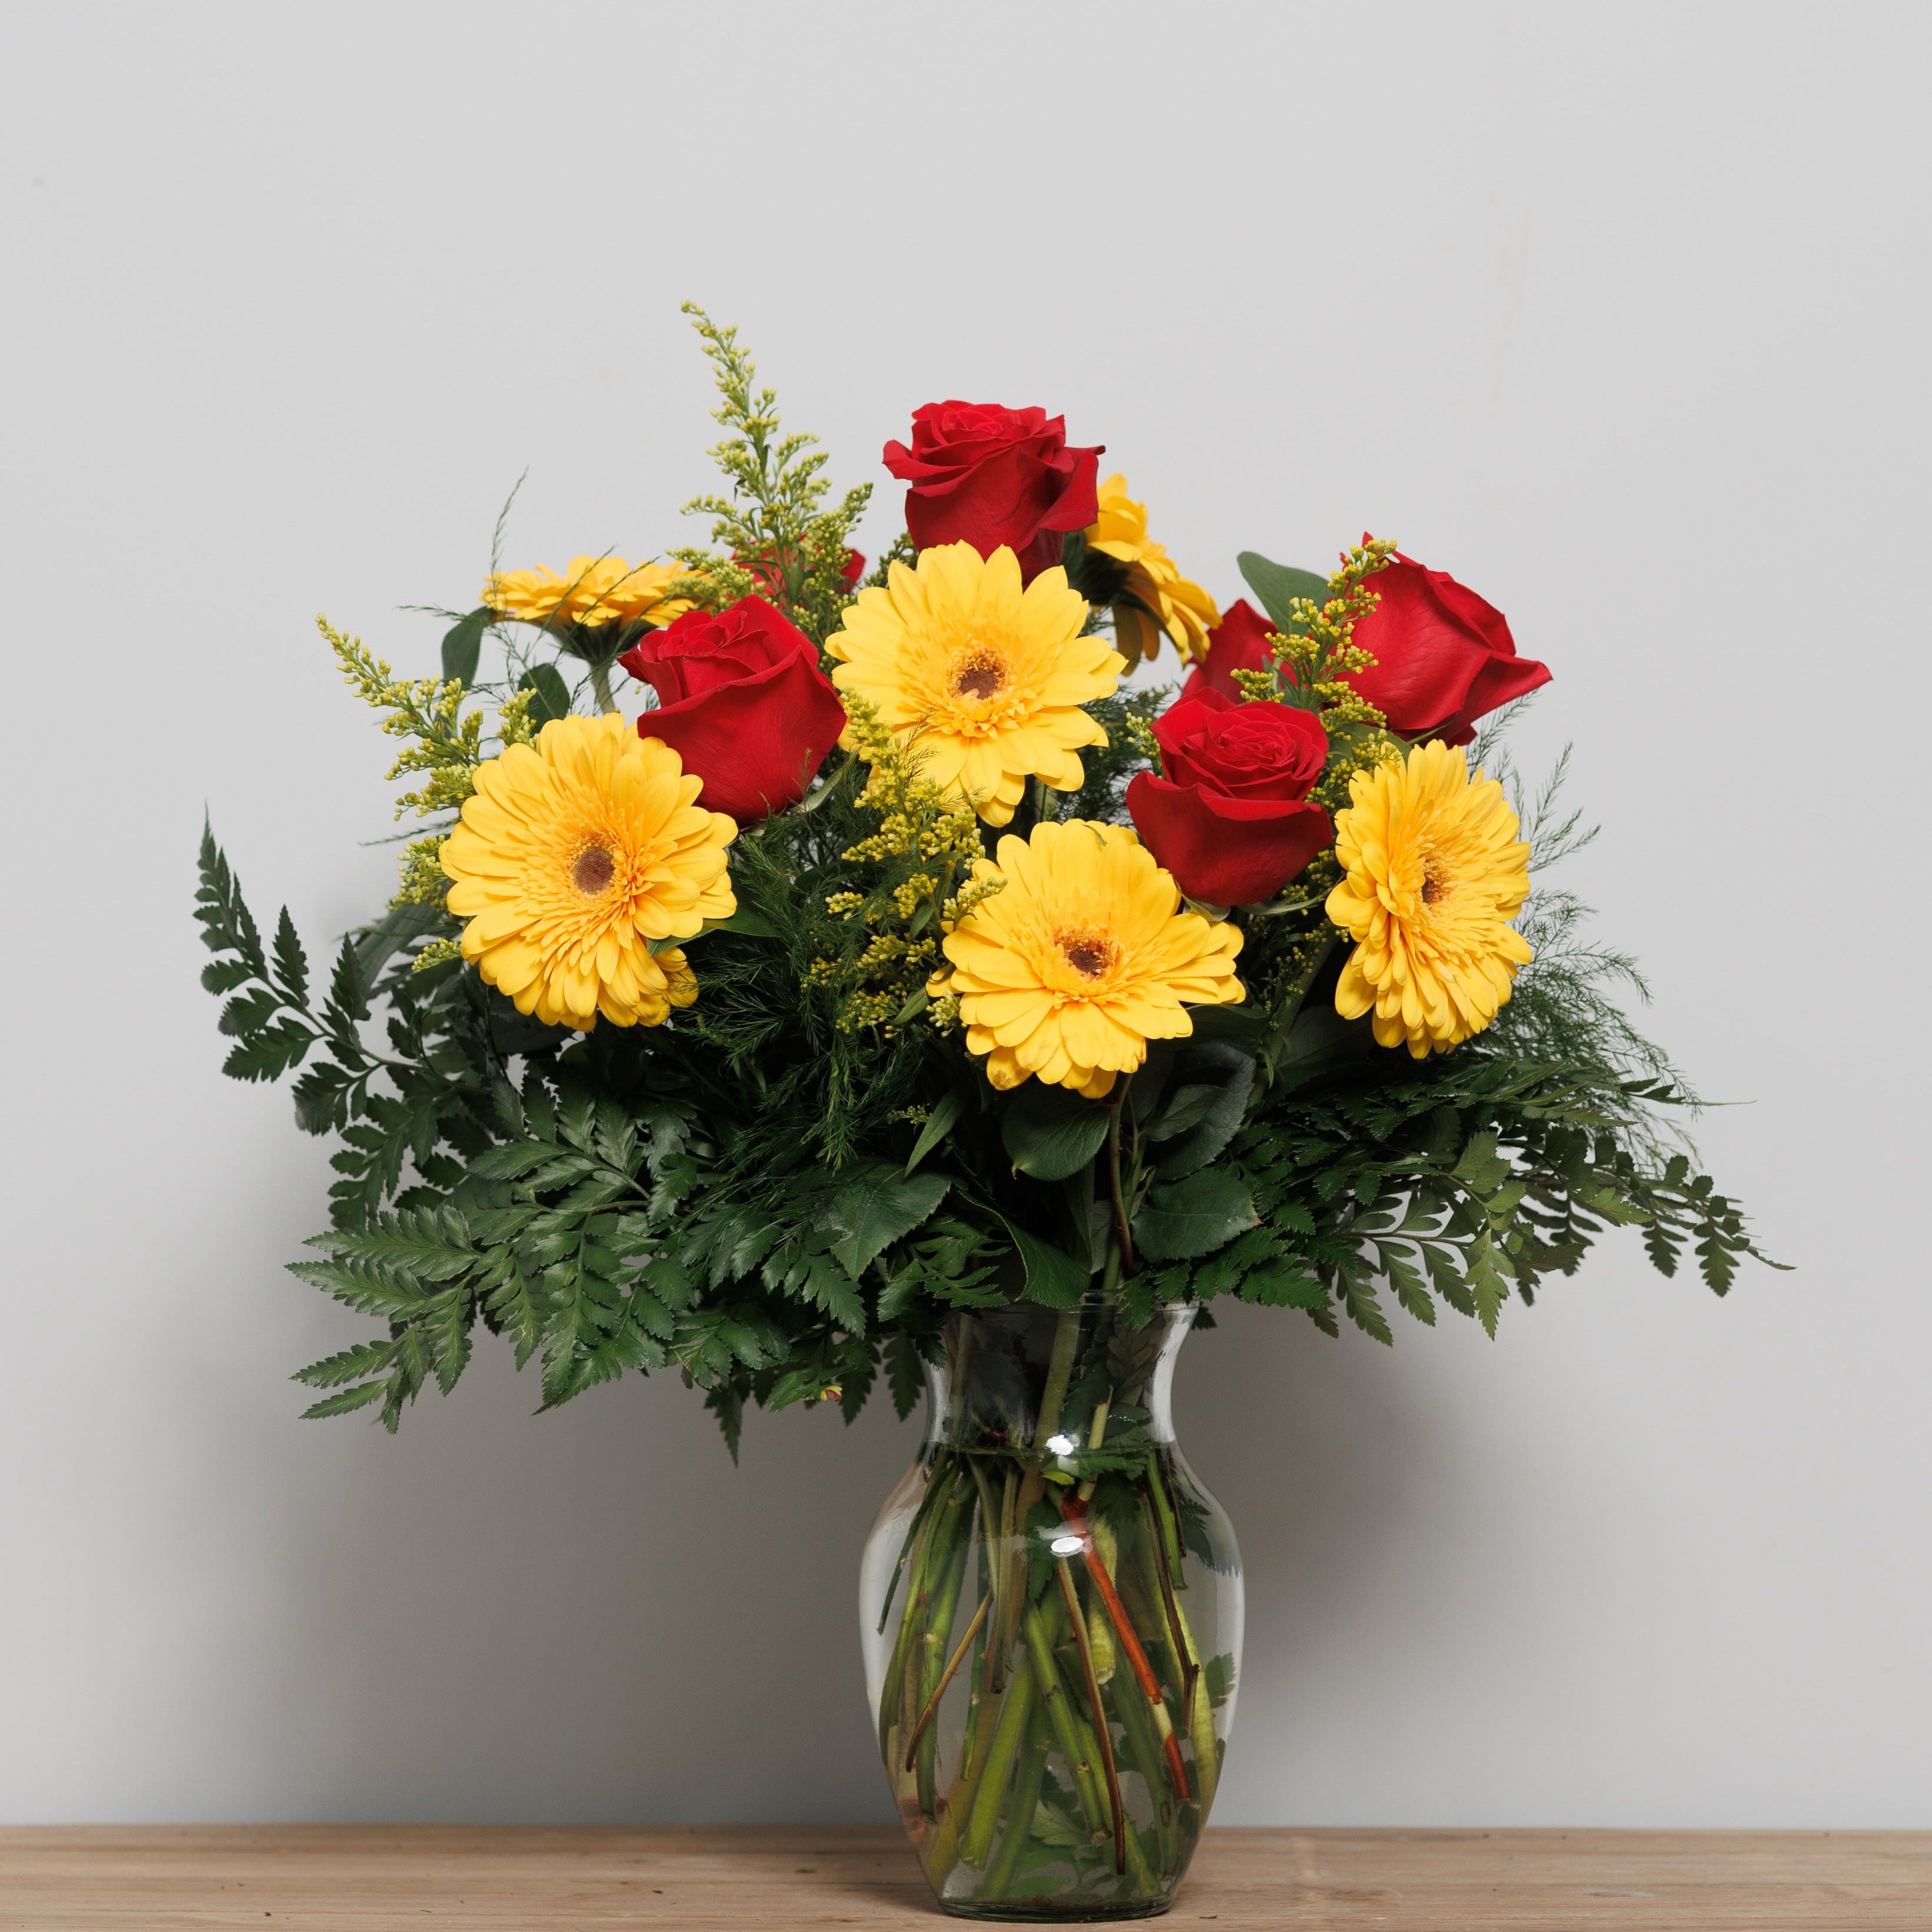 A vase arrangement with red roses and yellow Gerber daisies.